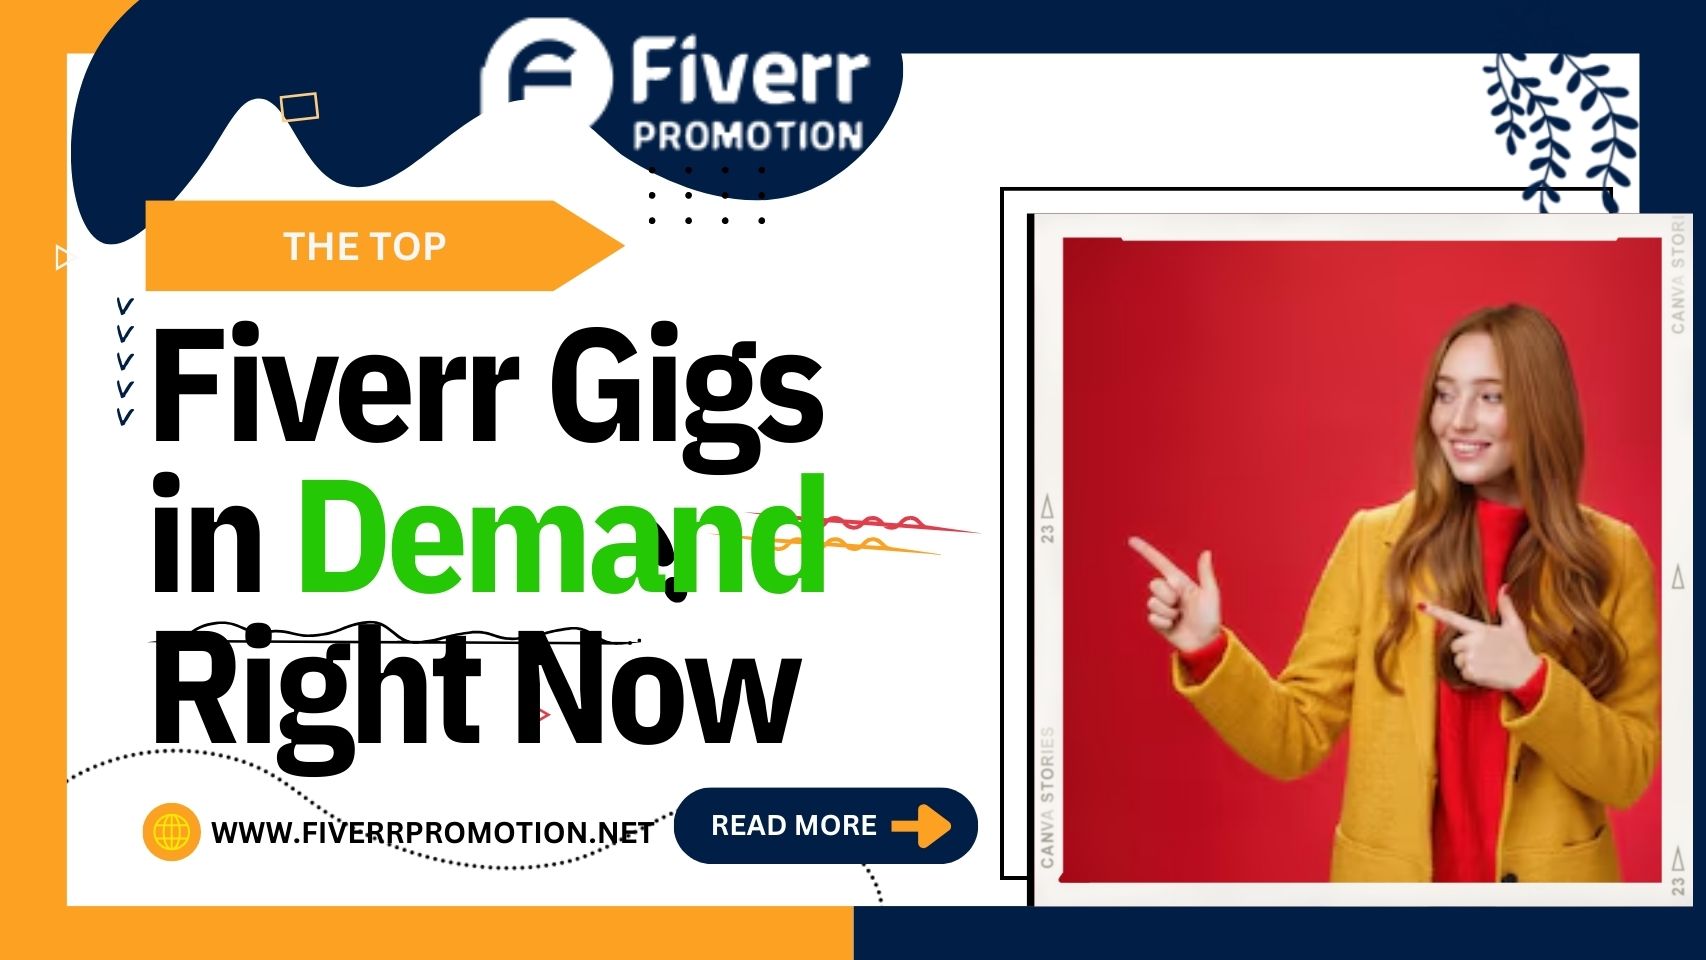 The Top Fiverr Gigs in Demand Right Now